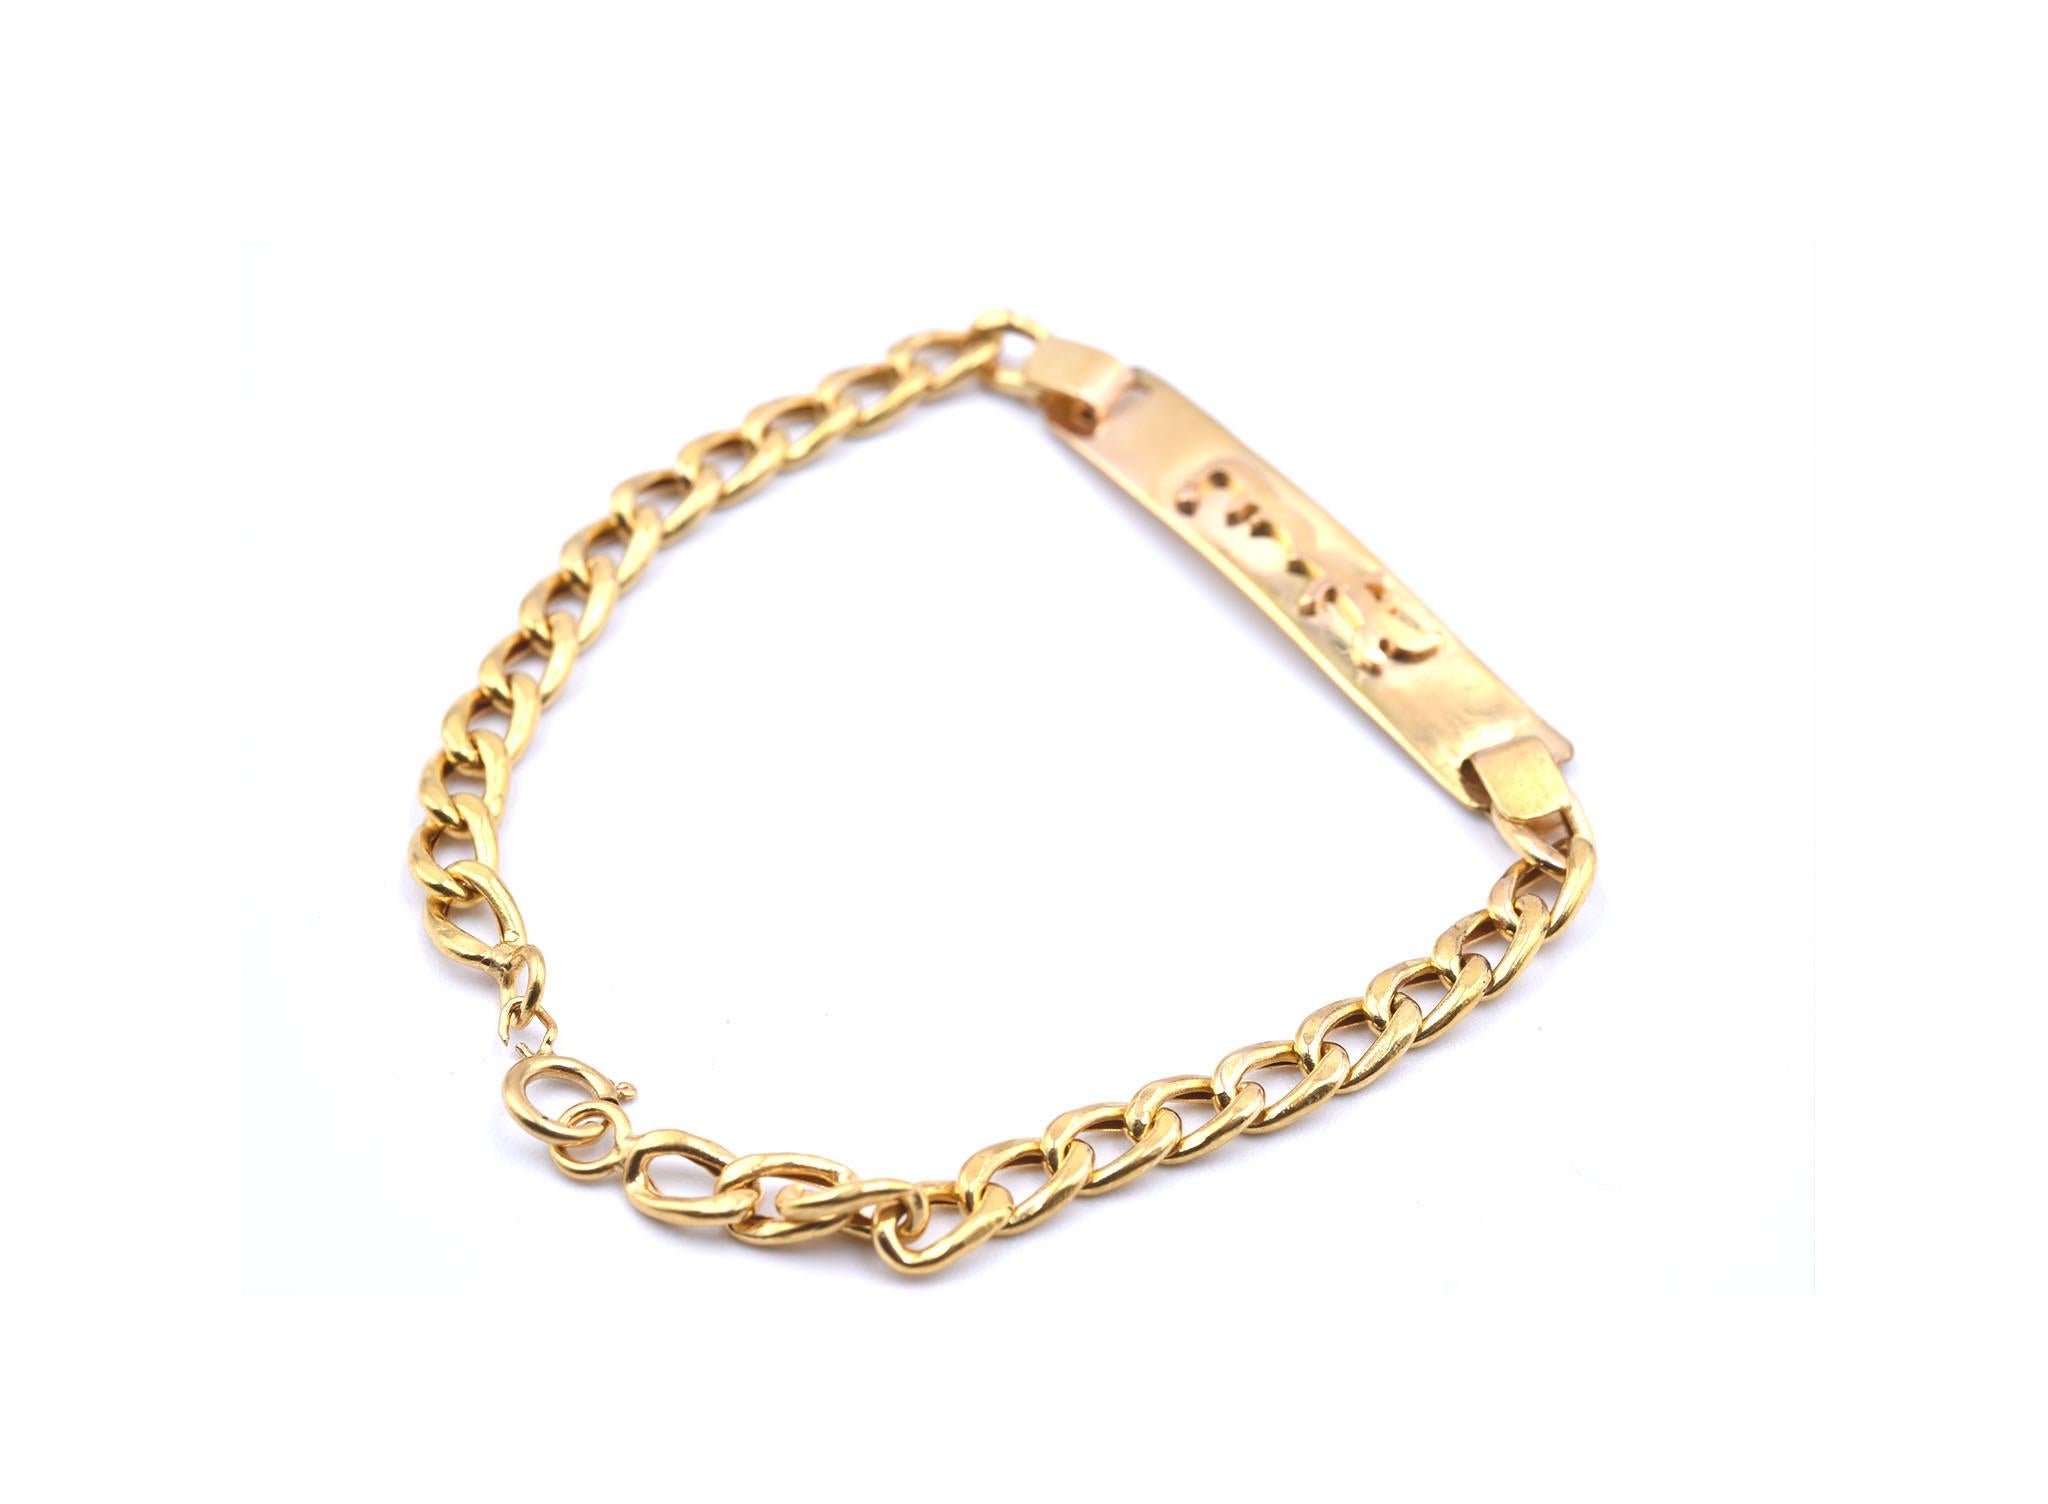 Designer: custom design
Material: 22k yellow gold
Dimensions: bracelet is 6-inches long and 6.19mm wide
Weight: 4.10 grams
